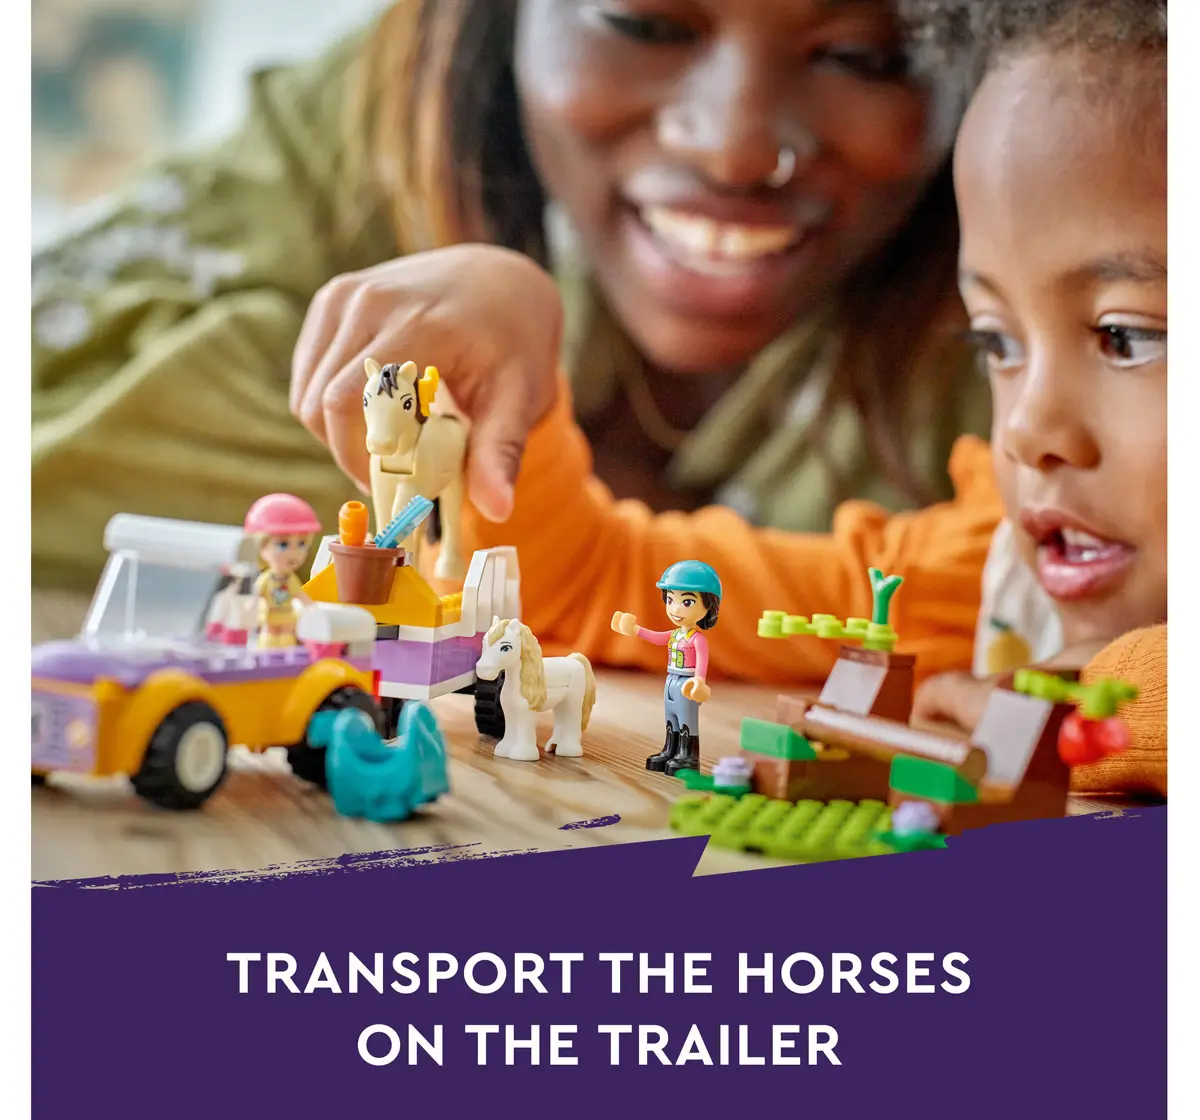 Lego Friends Horse And Pony Trailer Toy 42634 Multicolour For Kids Ages 4Y+ (105 Pieces) 